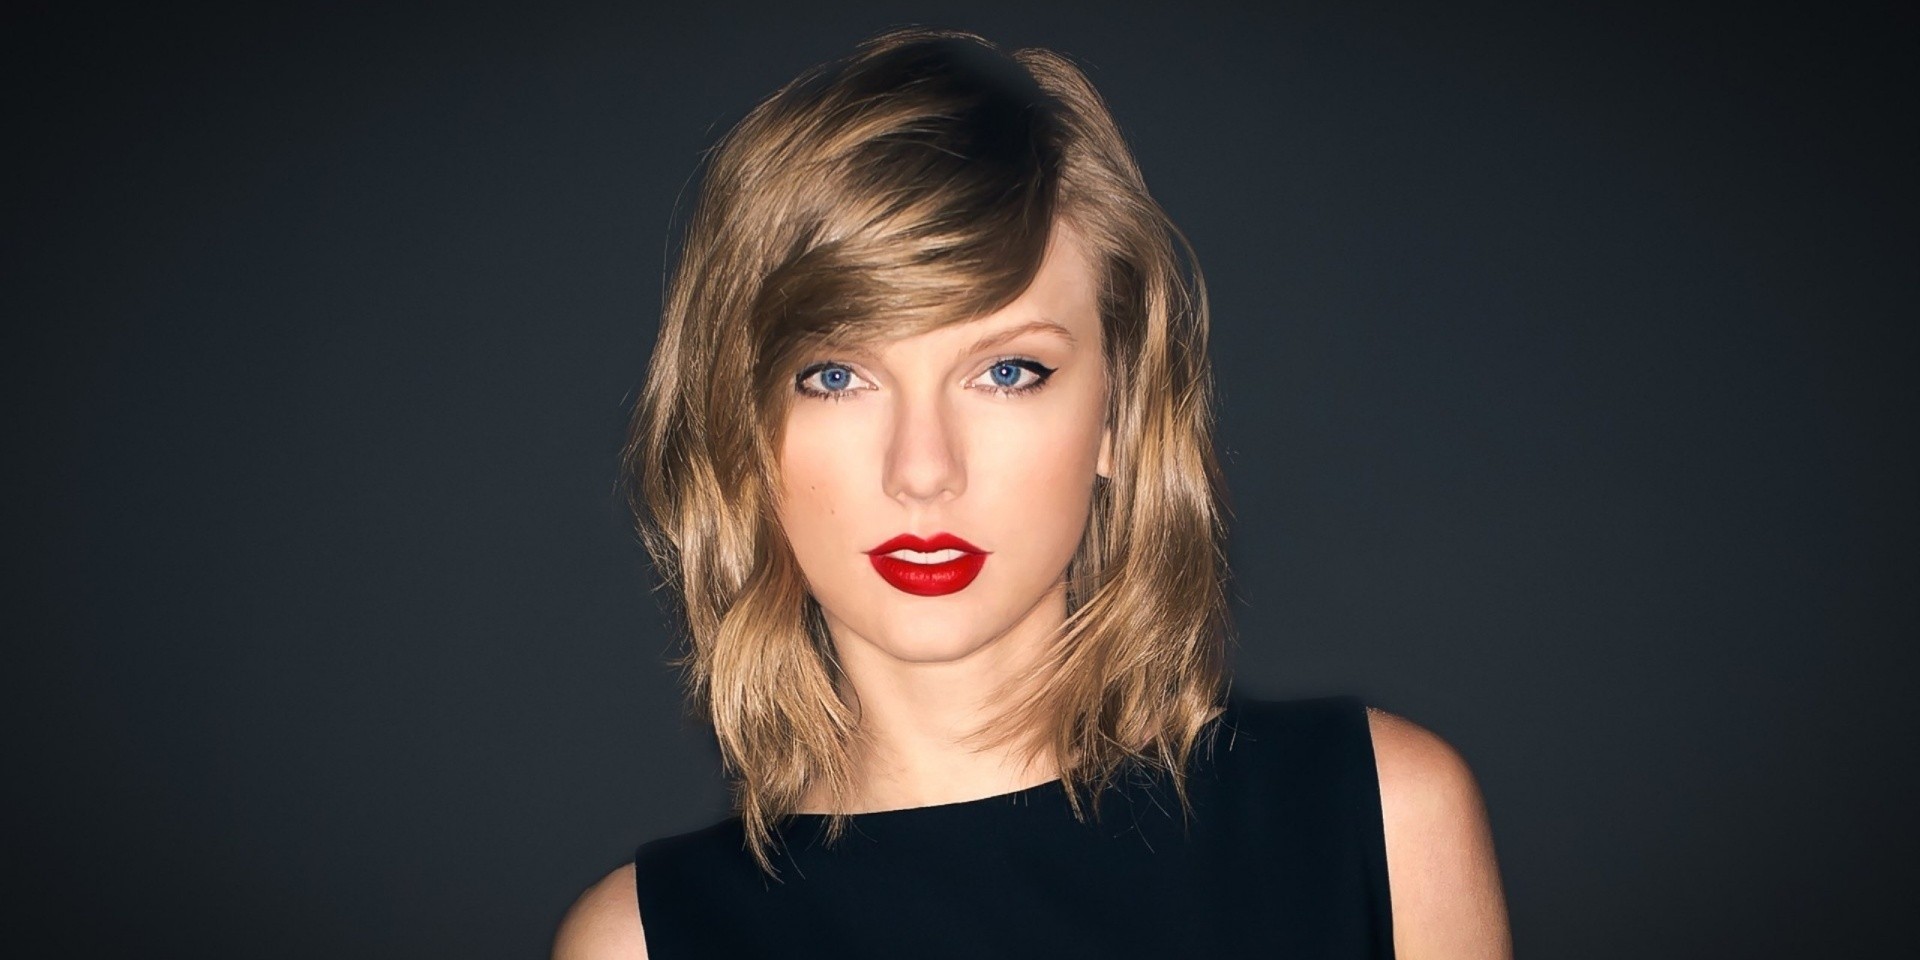 Taylor Swift signs incredible record deal with Republic Records and Universal Music Group